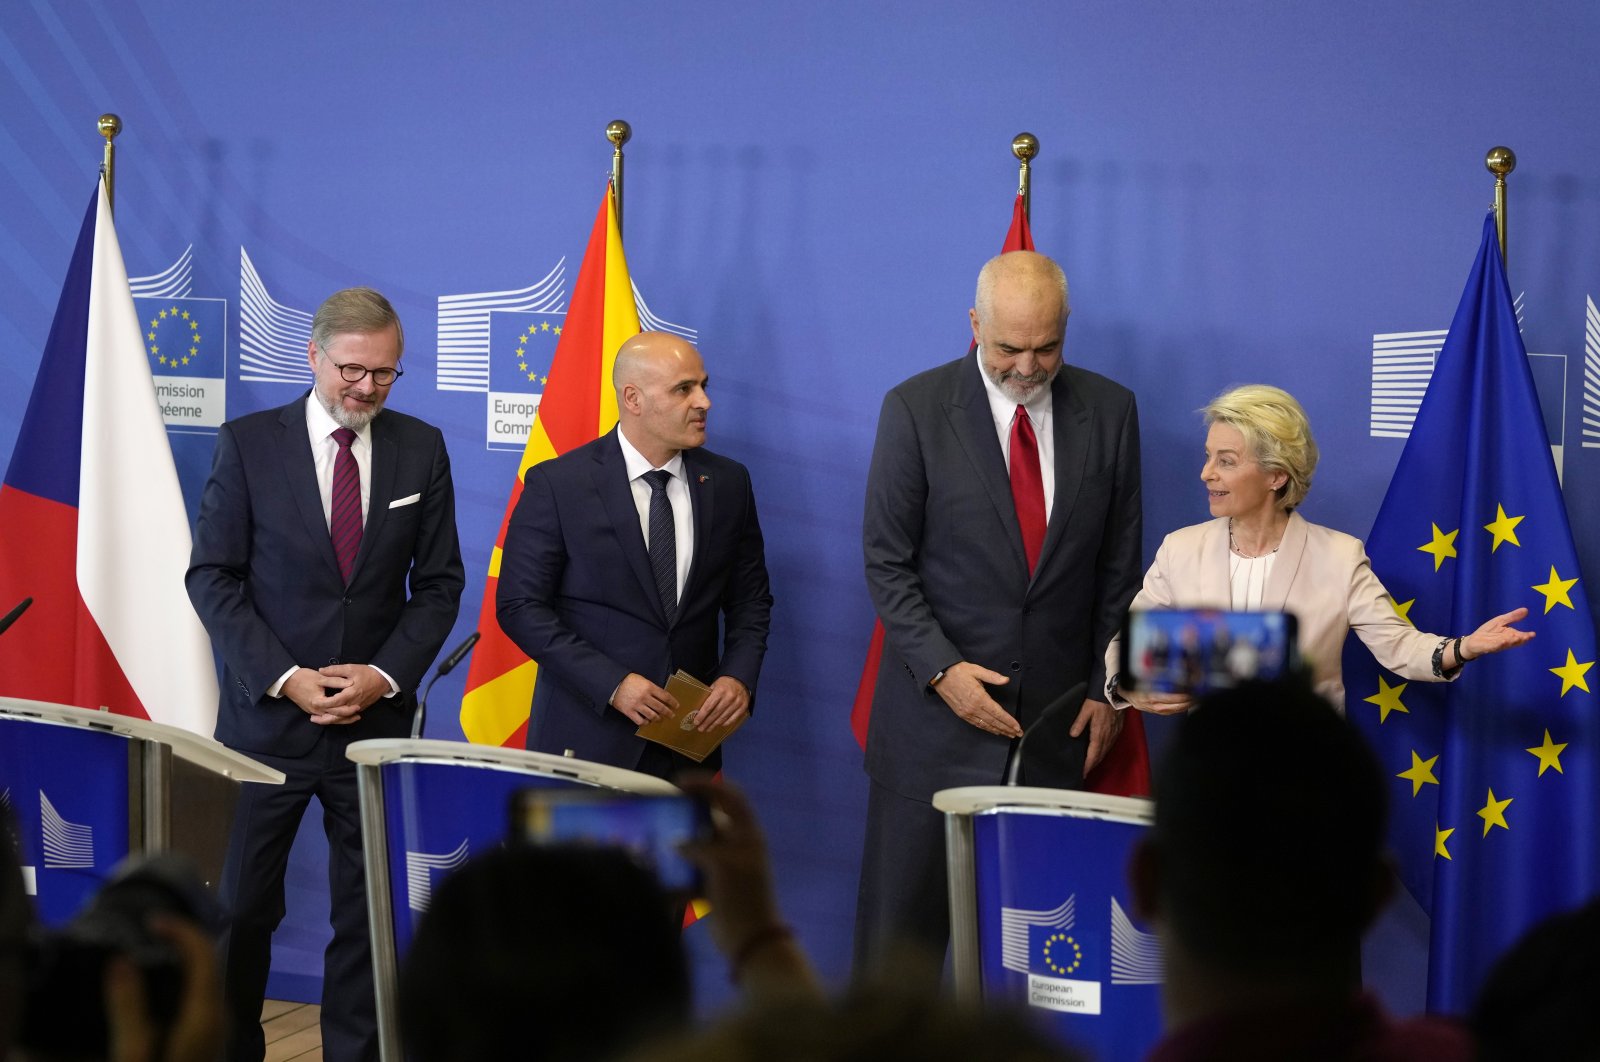 Czech Republic&#039;s Prime Minister Petr Fiala (2nd L), North Macedonia&#039;s Prime Minister Dimitar Kovacevski (L), Albanian Prime Minister Edi Rama (C) and European Commission President Ursula von der Leyen (R) leave the podium at the end of a media conference at EU headquarters in Brussels, July 19, 2022. (AP Photo)